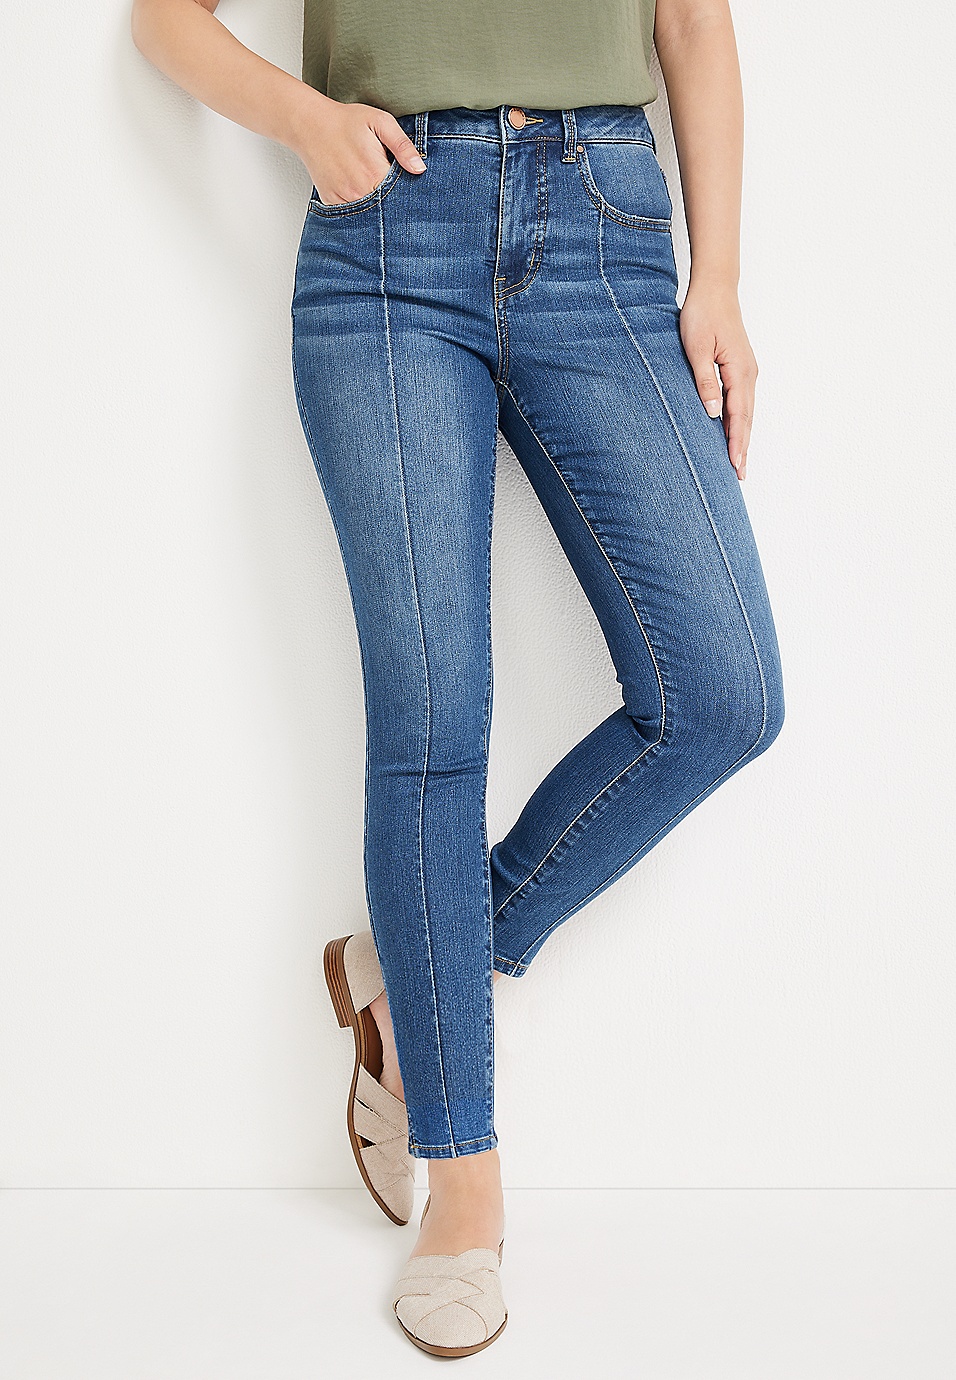 m jeans by maurices™ Everflex™ Super Skinny High Rise Stretch Jean